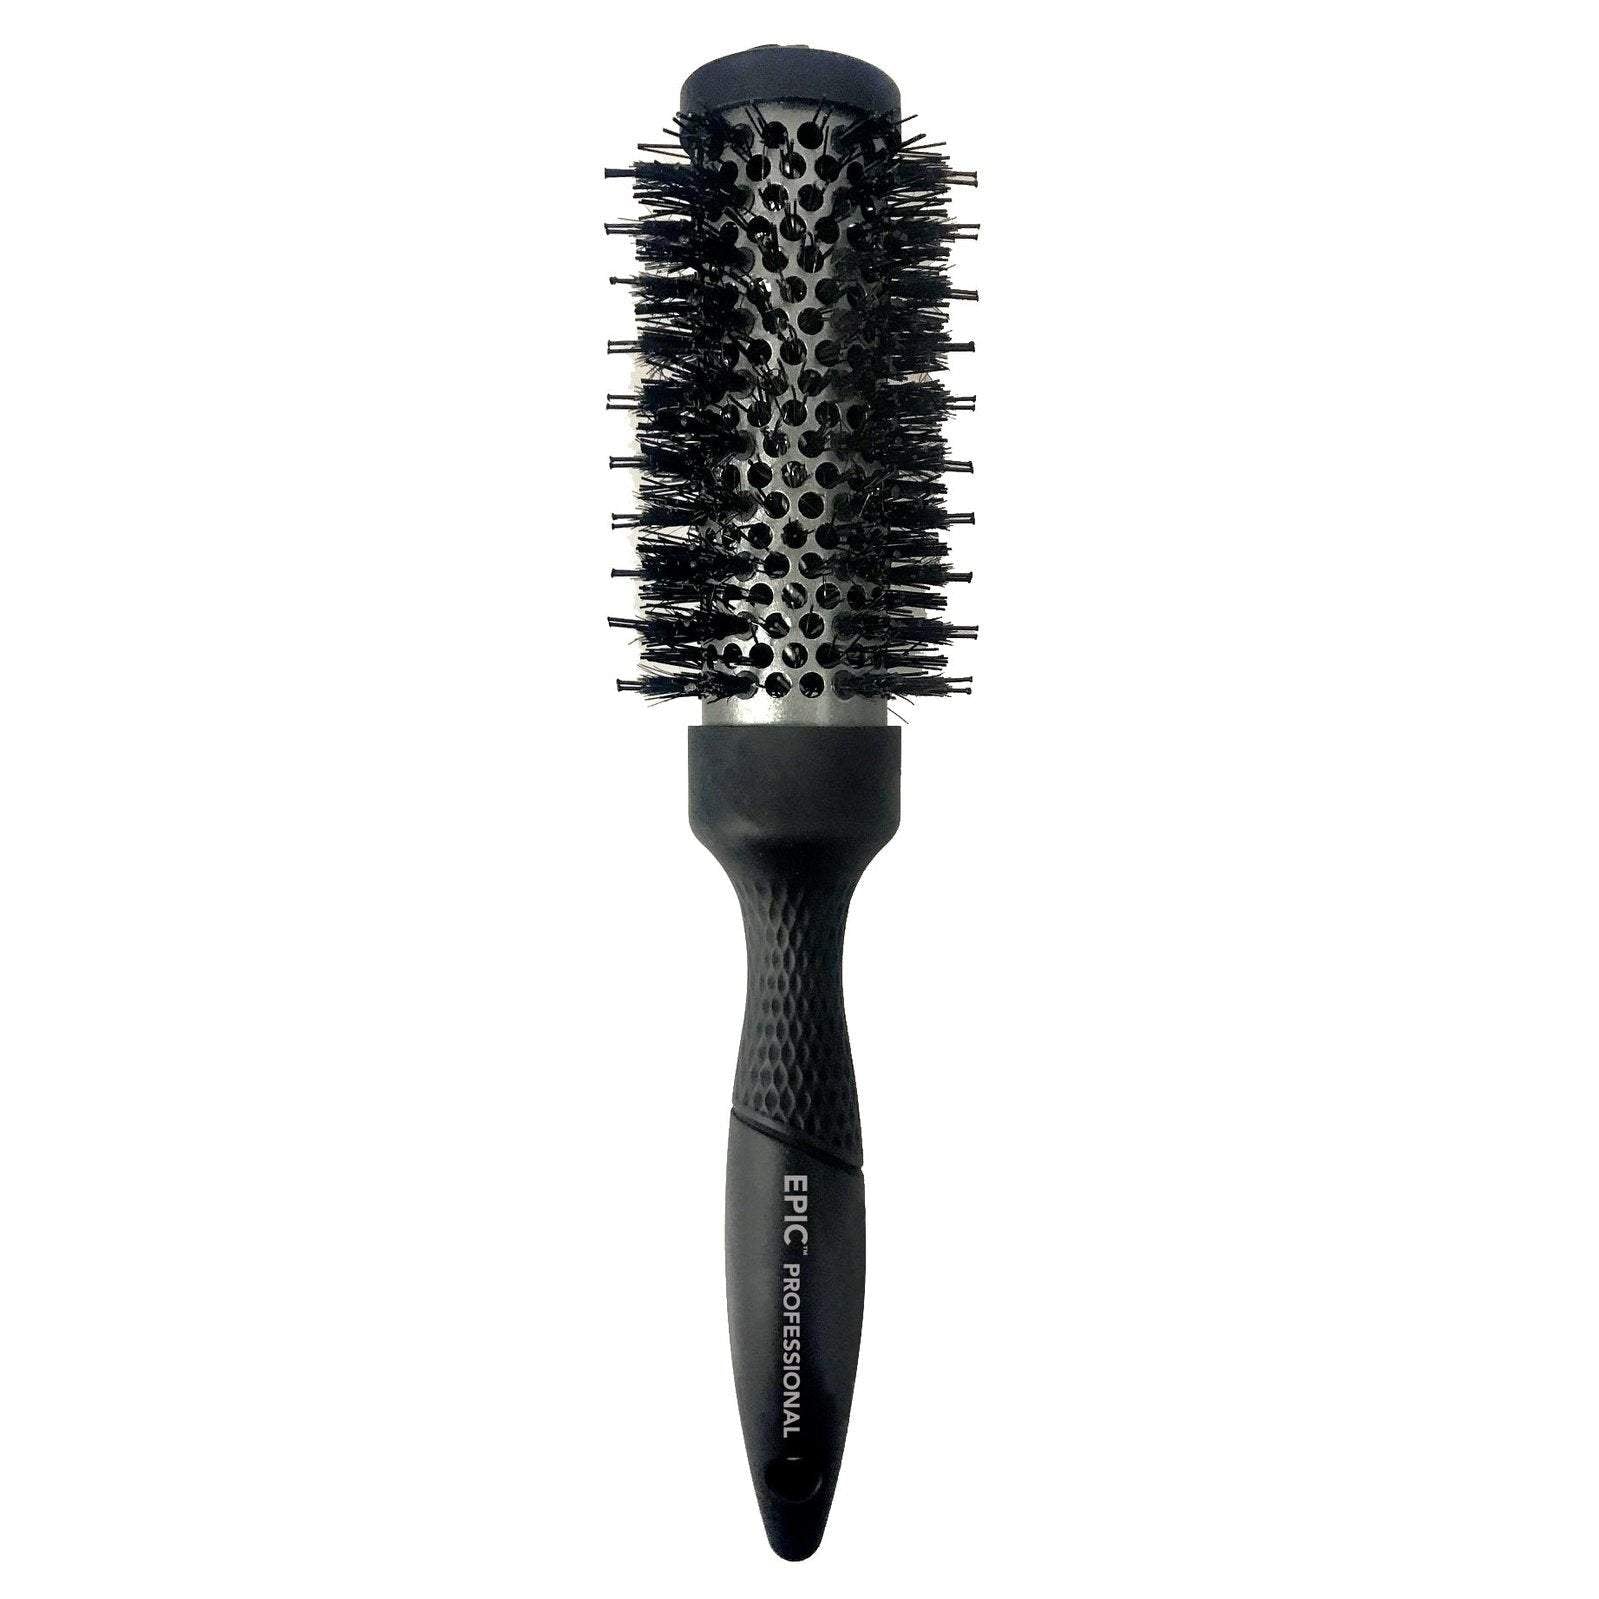 Wet Brush Epic Pro Blowout Brush-Wet Brush-Brand_Wet Brush,Collection_Hair,Collection_Tools and Brushes,Tool_Blowout Brushes,Tool_Brushes,Tool_Hair Tools,WET_Epic Collection,WET_Pro Round and Blowout Brushes